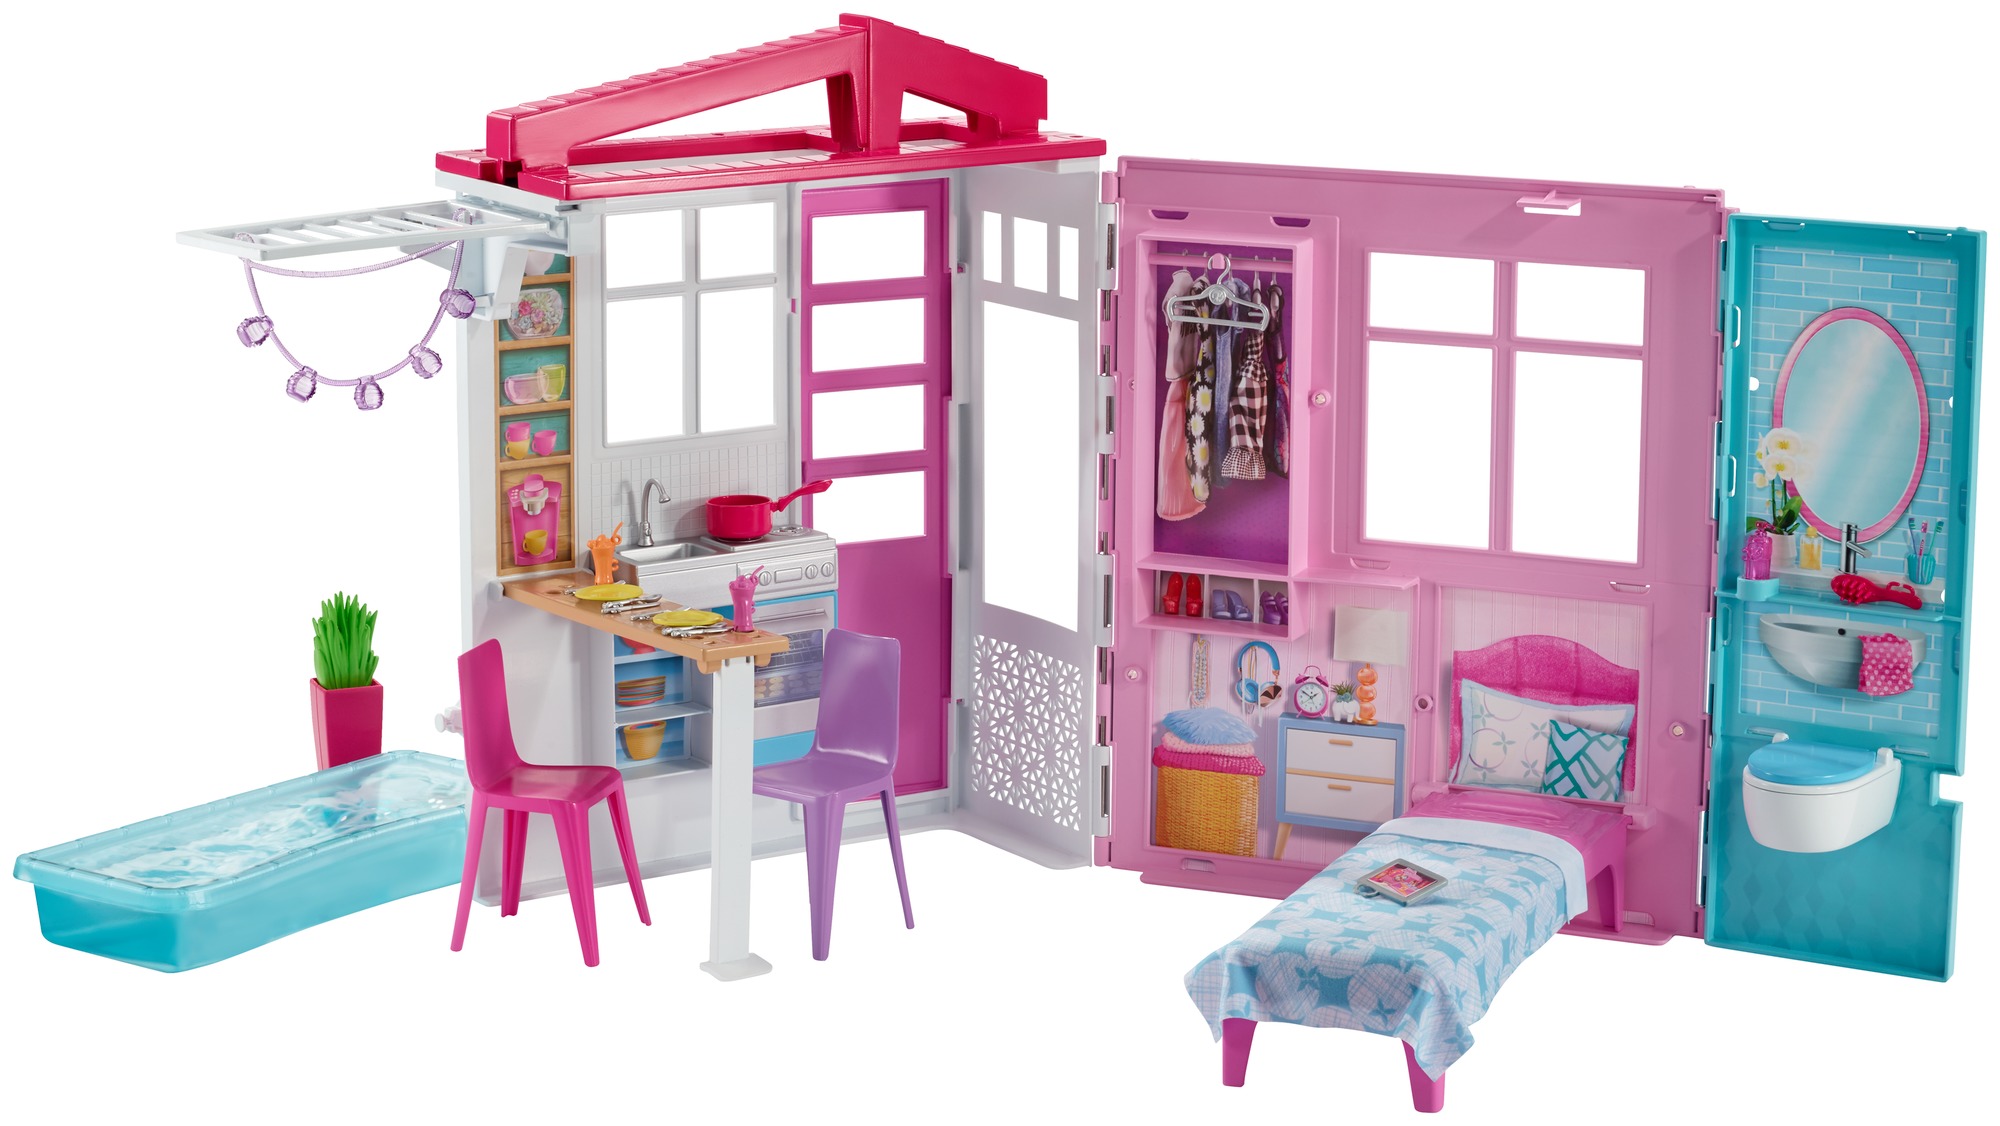 Barbie Estate Fully Furnished Close & Go House with Themed Accessories - image 1 of 7